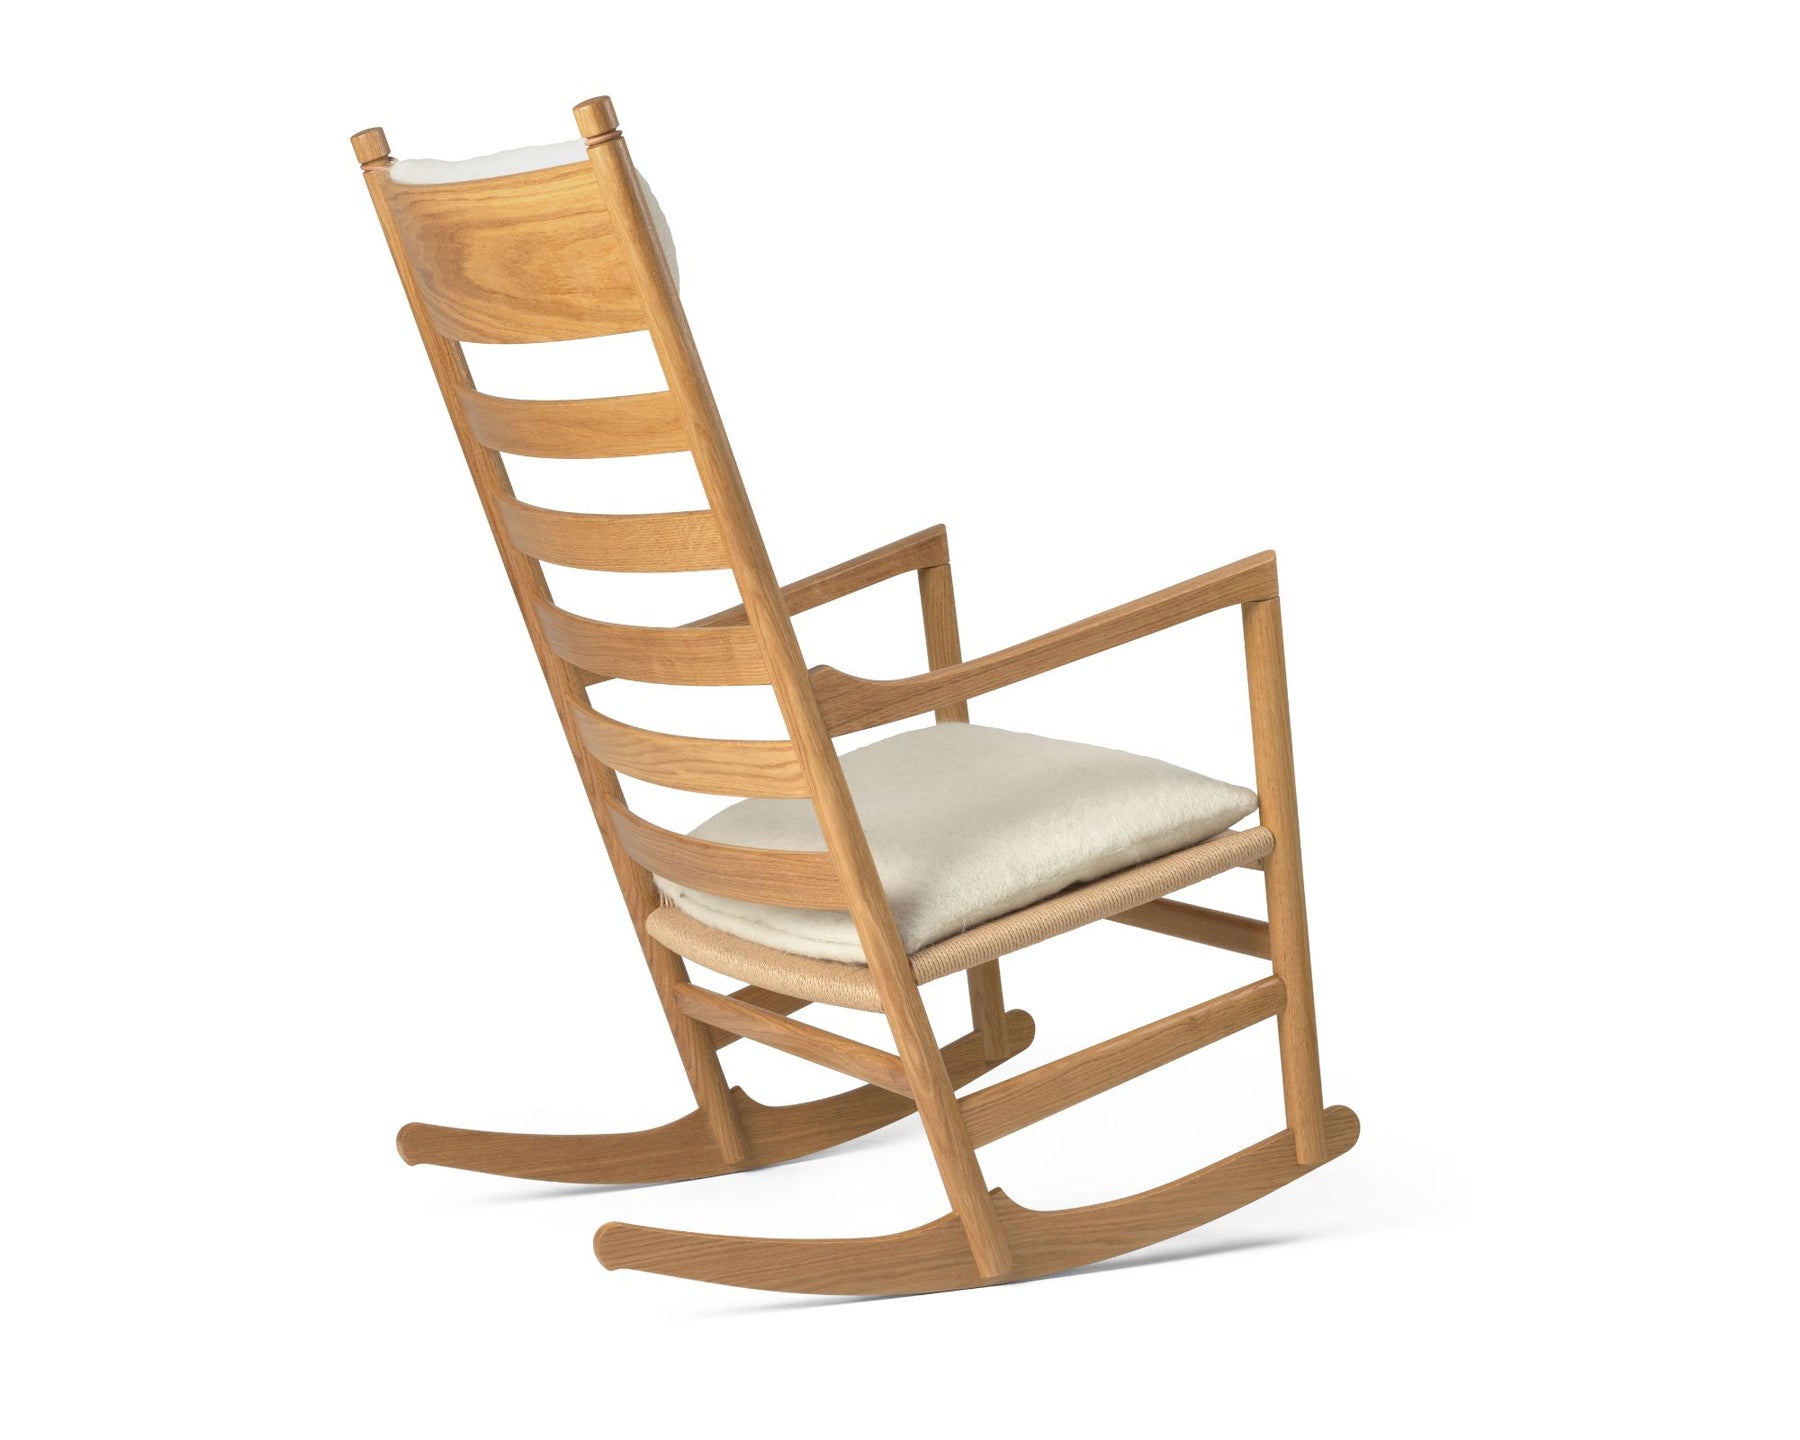 Shaker Style Rocking Chair | DSHOP